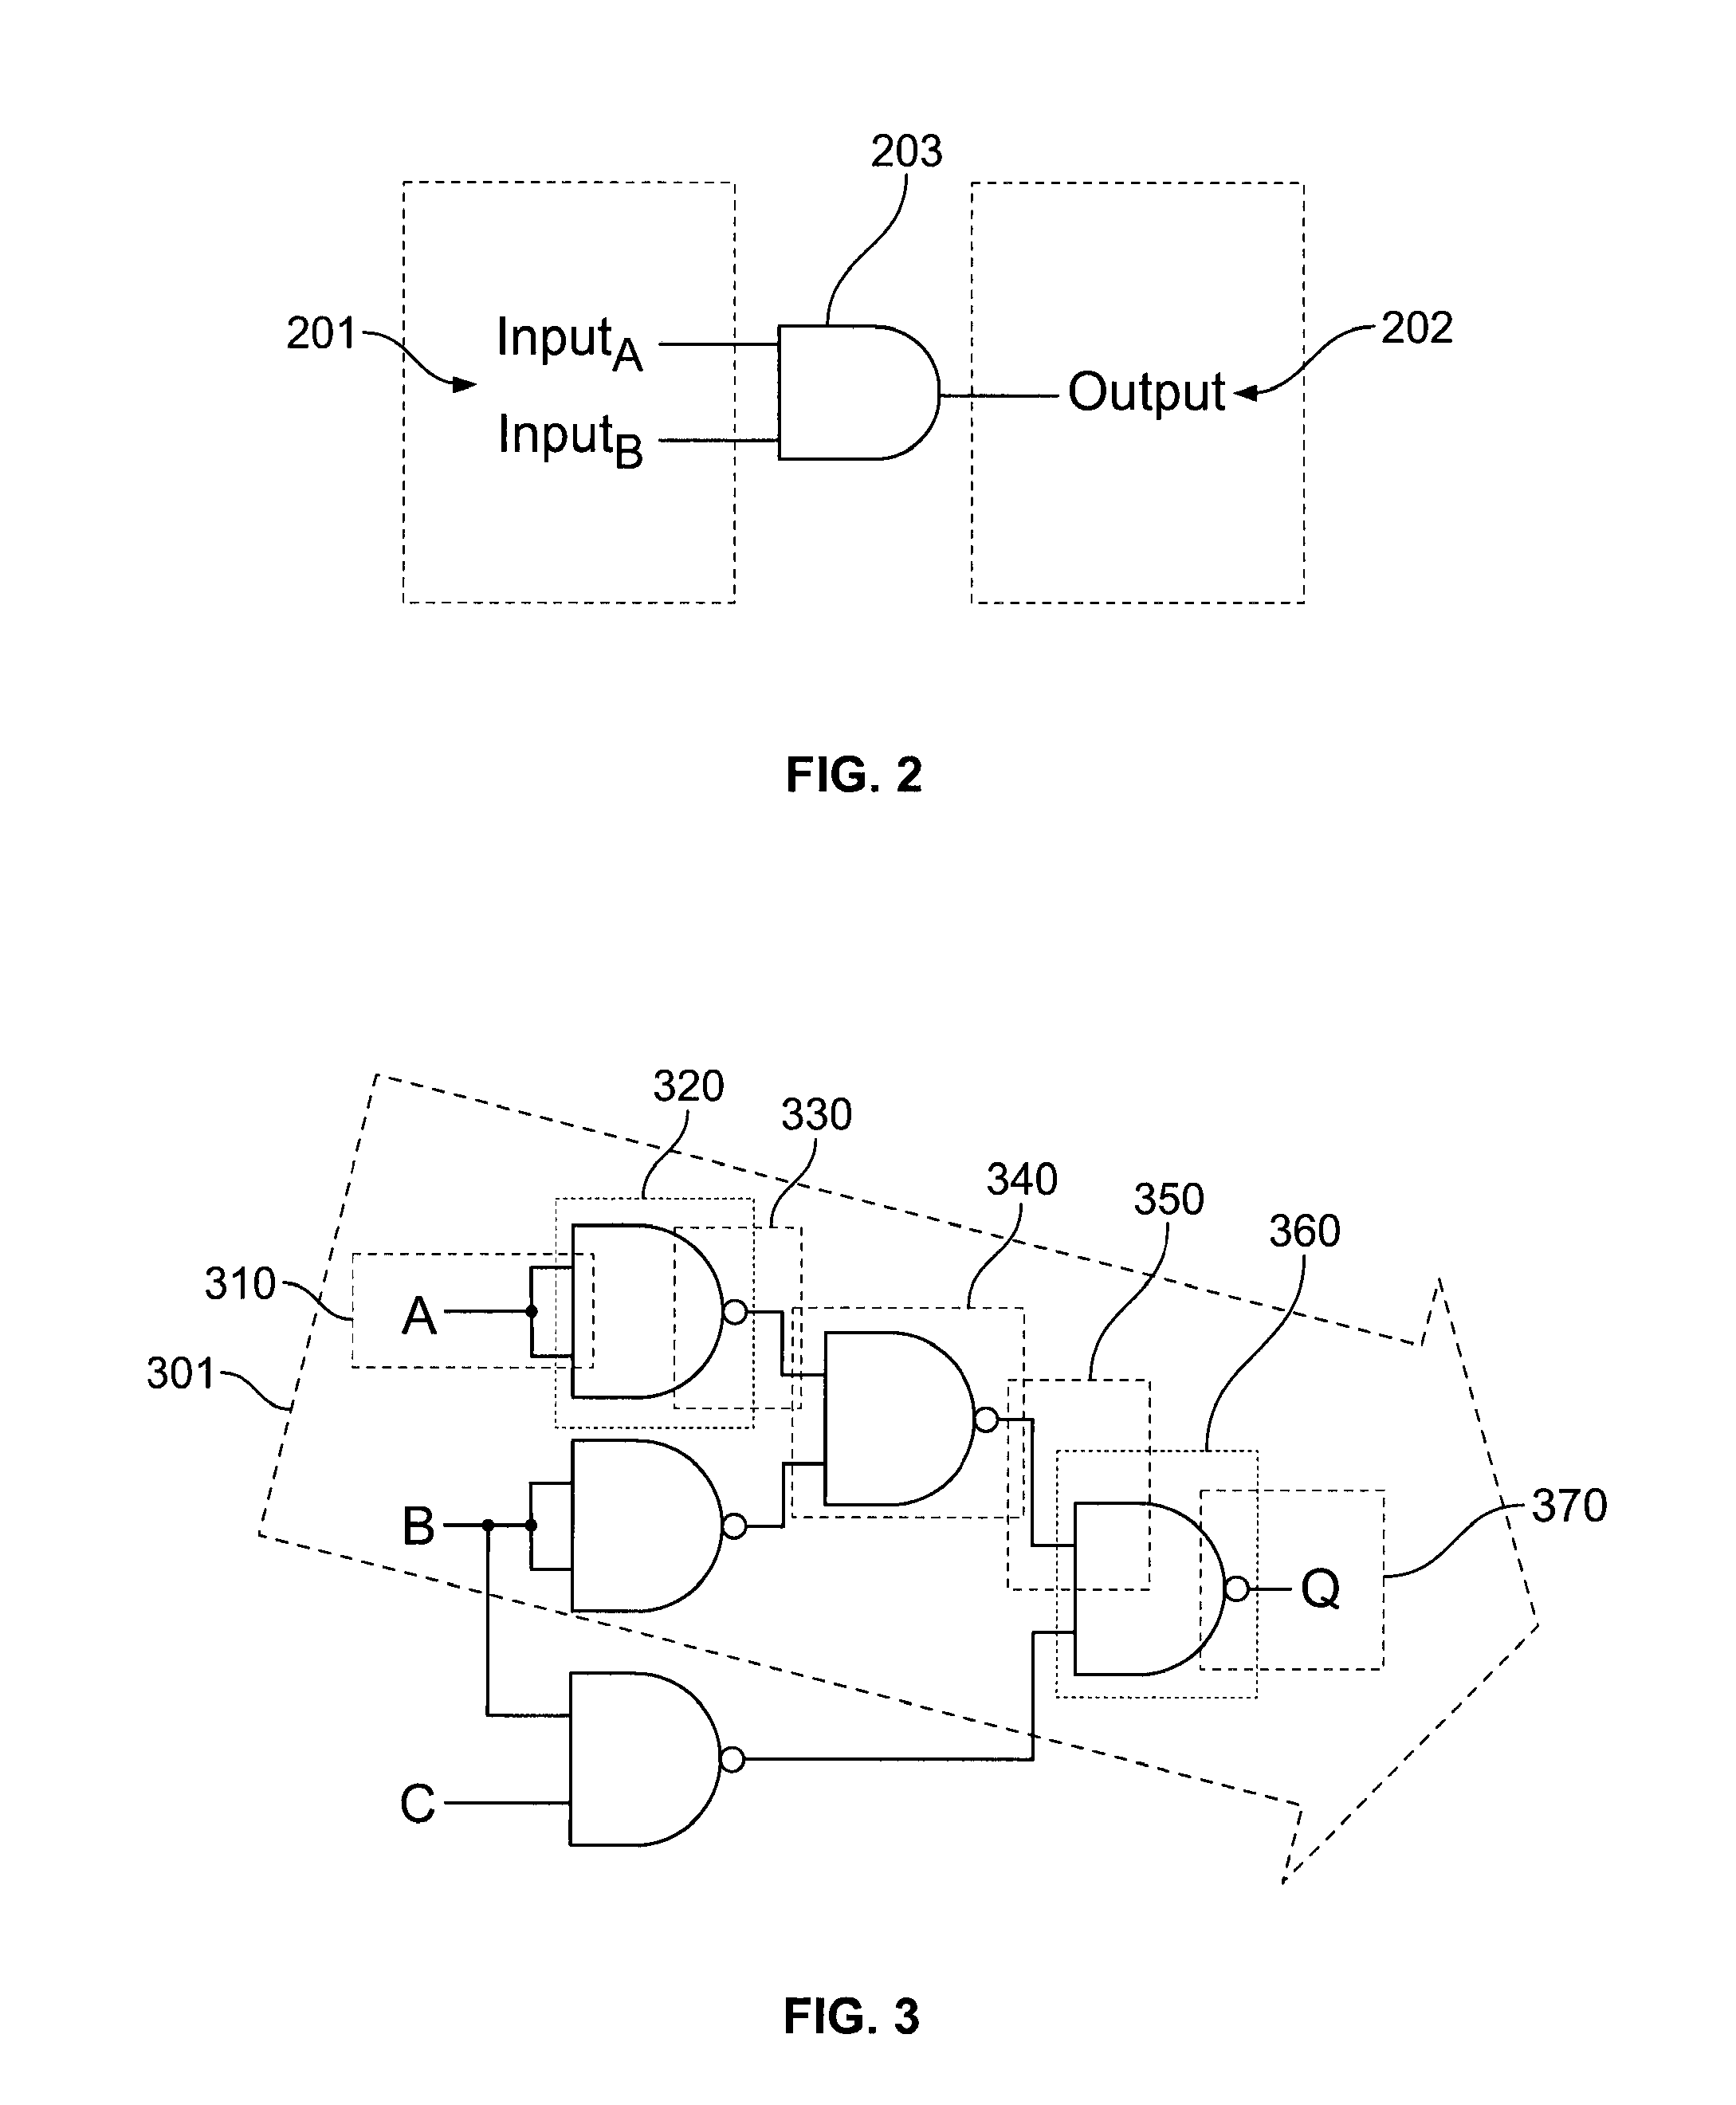 Method and apparatus for improved secure computing and communications